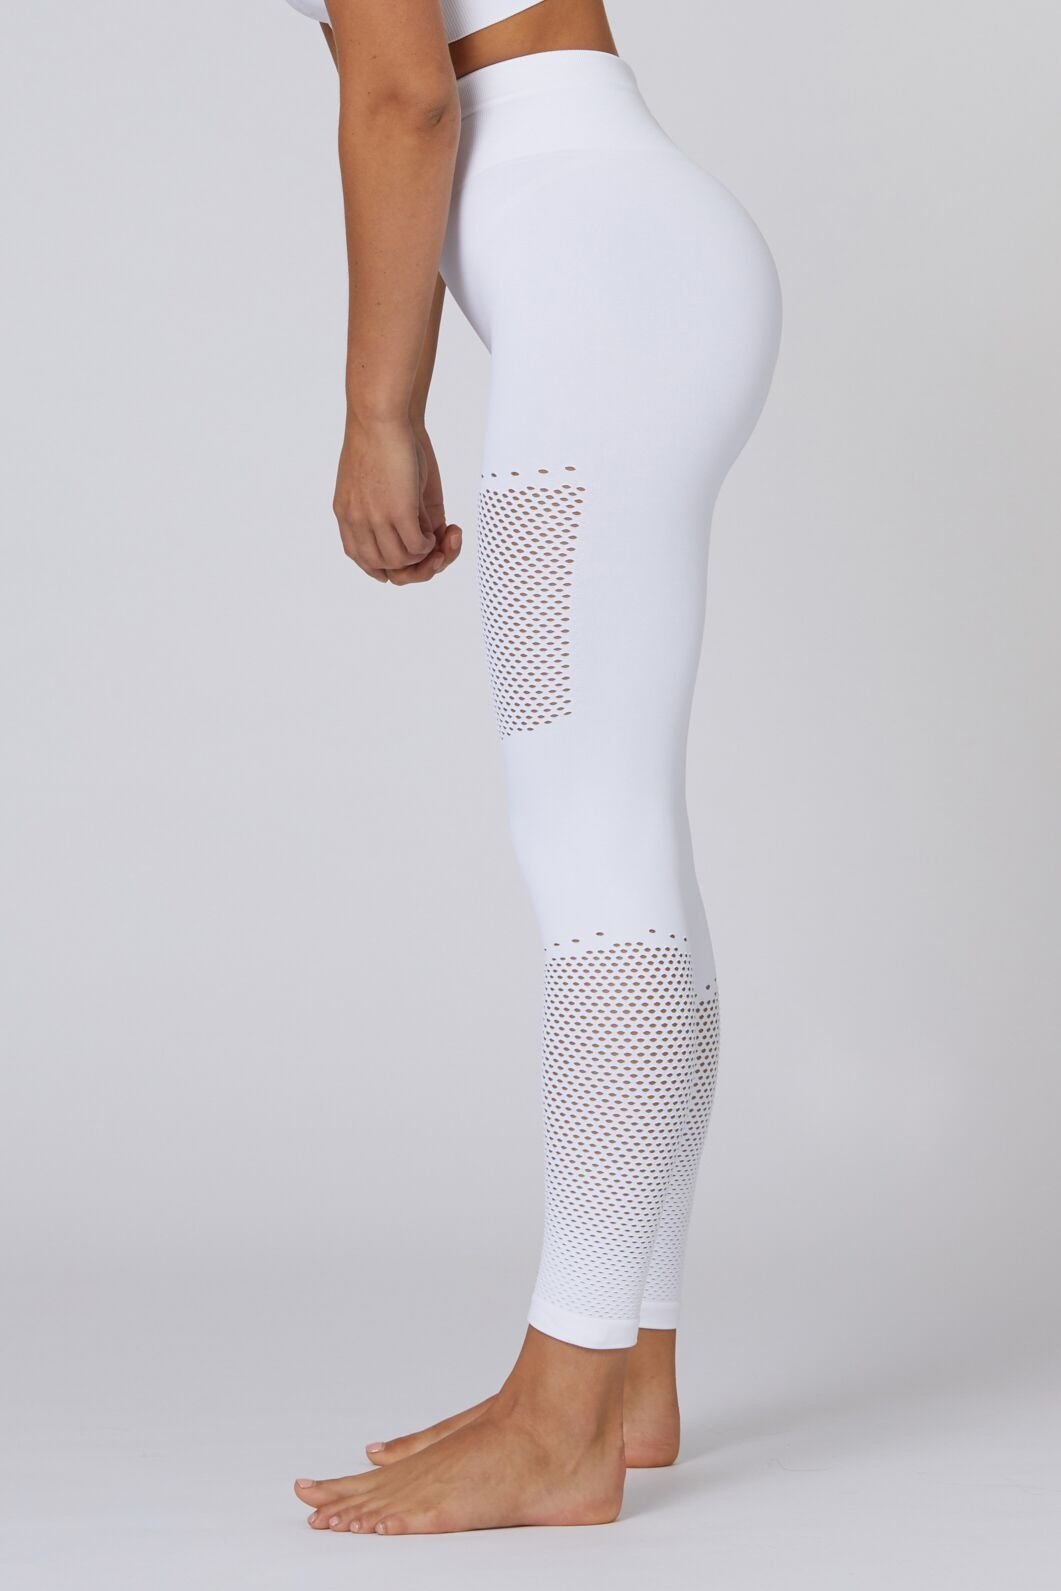 L'urv - Heavens Open Legging - Black Legging with lace up trim down the  front of the leg - STELLASSTYLE